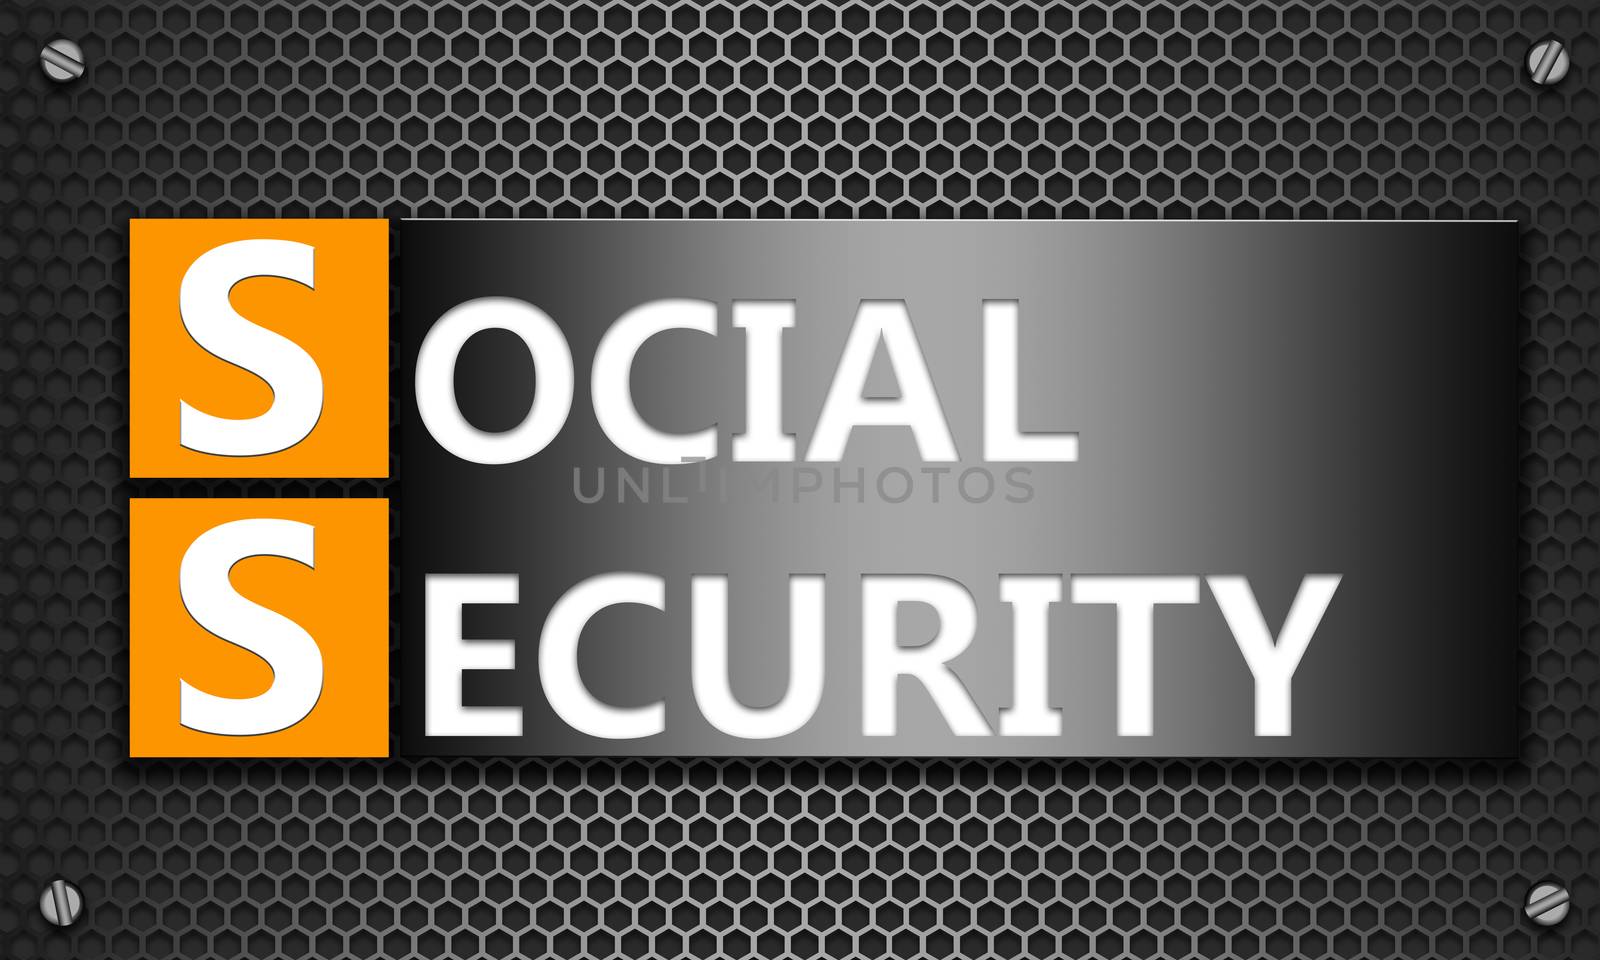 Social security concept on mesh hexagon background by tang90246